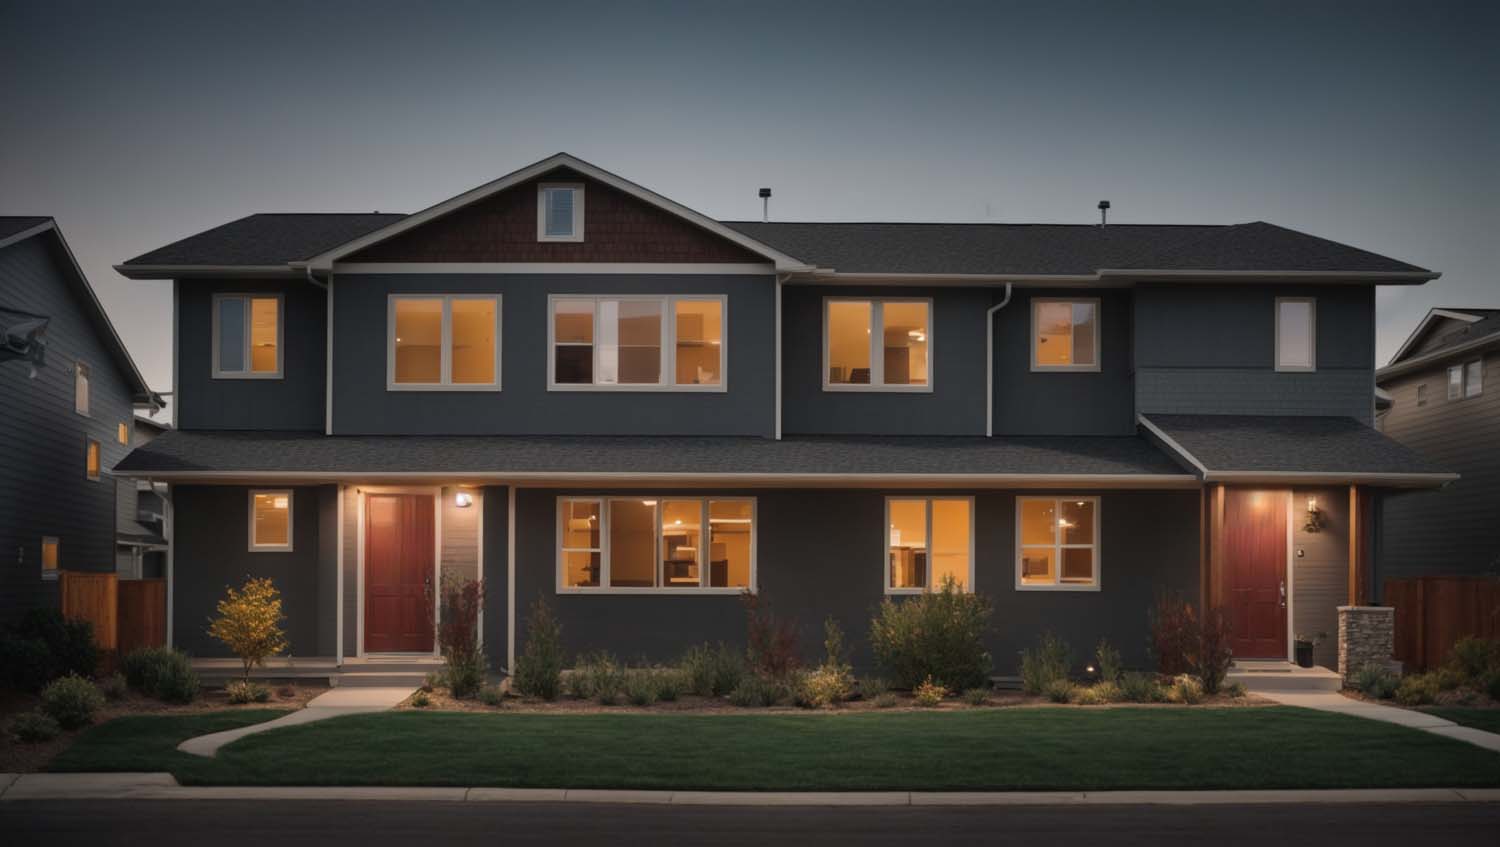 A down-to-earth duplex design in Longmont, Colorado, with LP Siding.